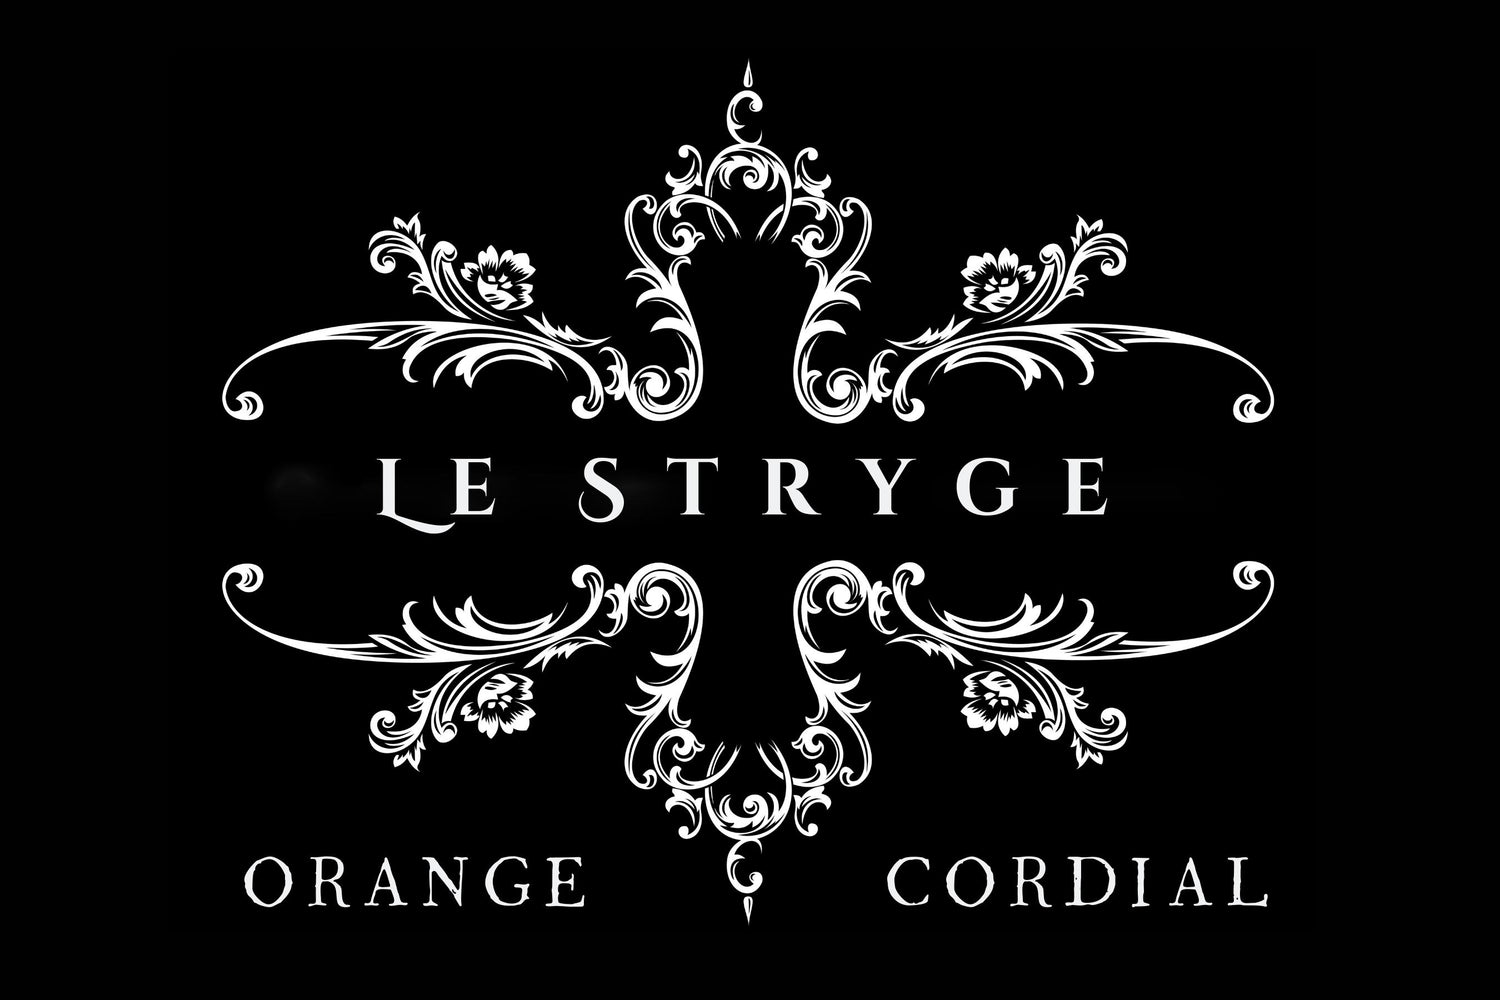 Le Stryge Orange Cordial Candle | Luxury Home Fragrances and Decor